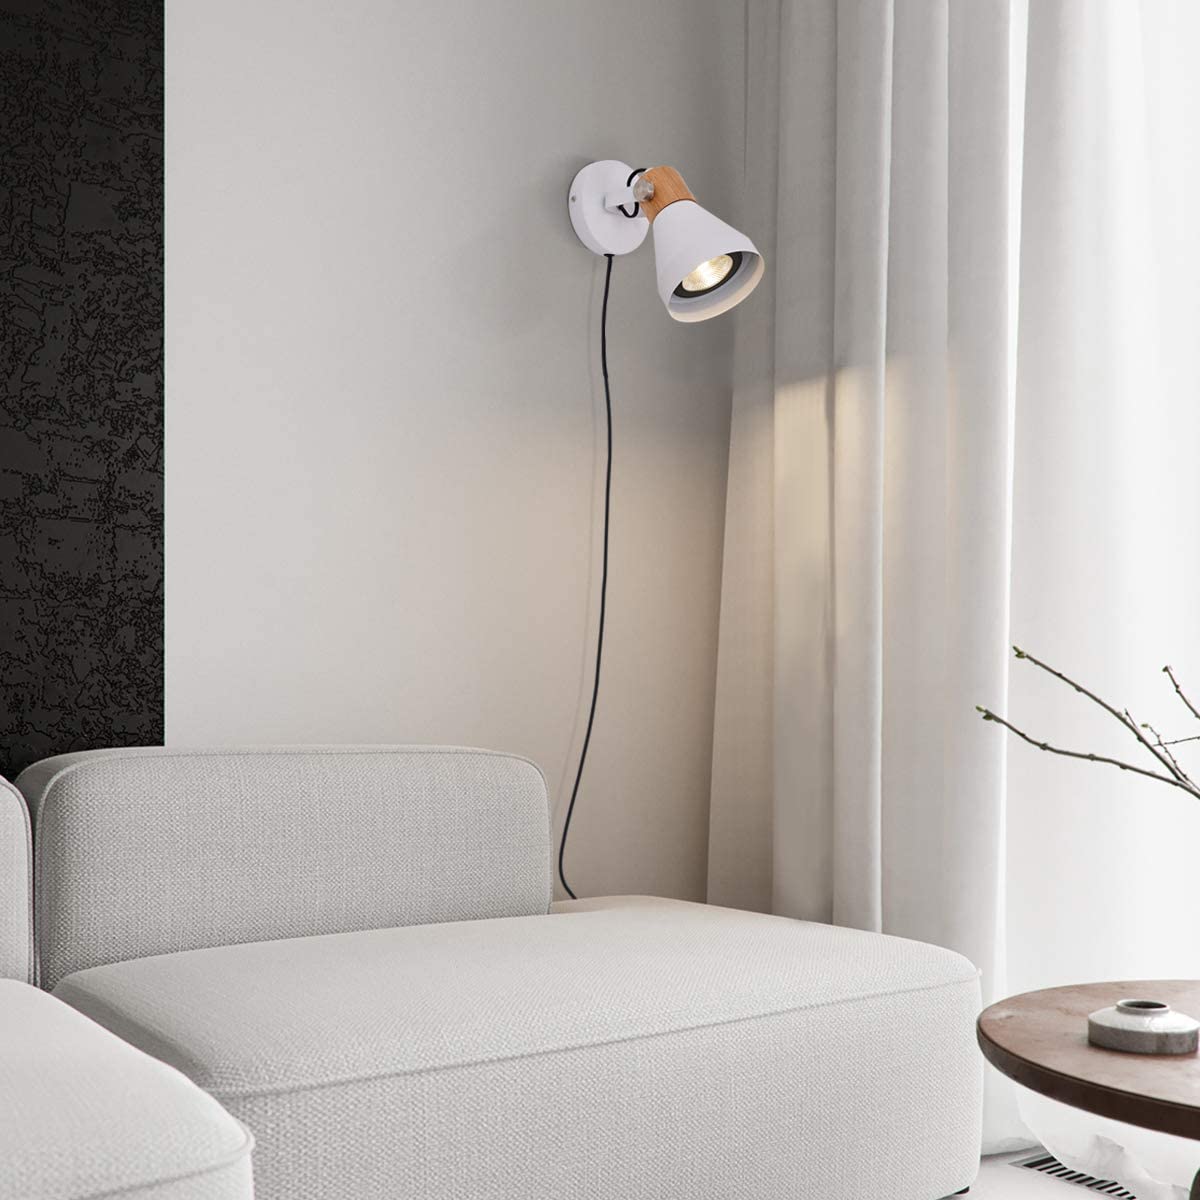 Modern wall lights with plug in cord white swing wall lights for bedroom